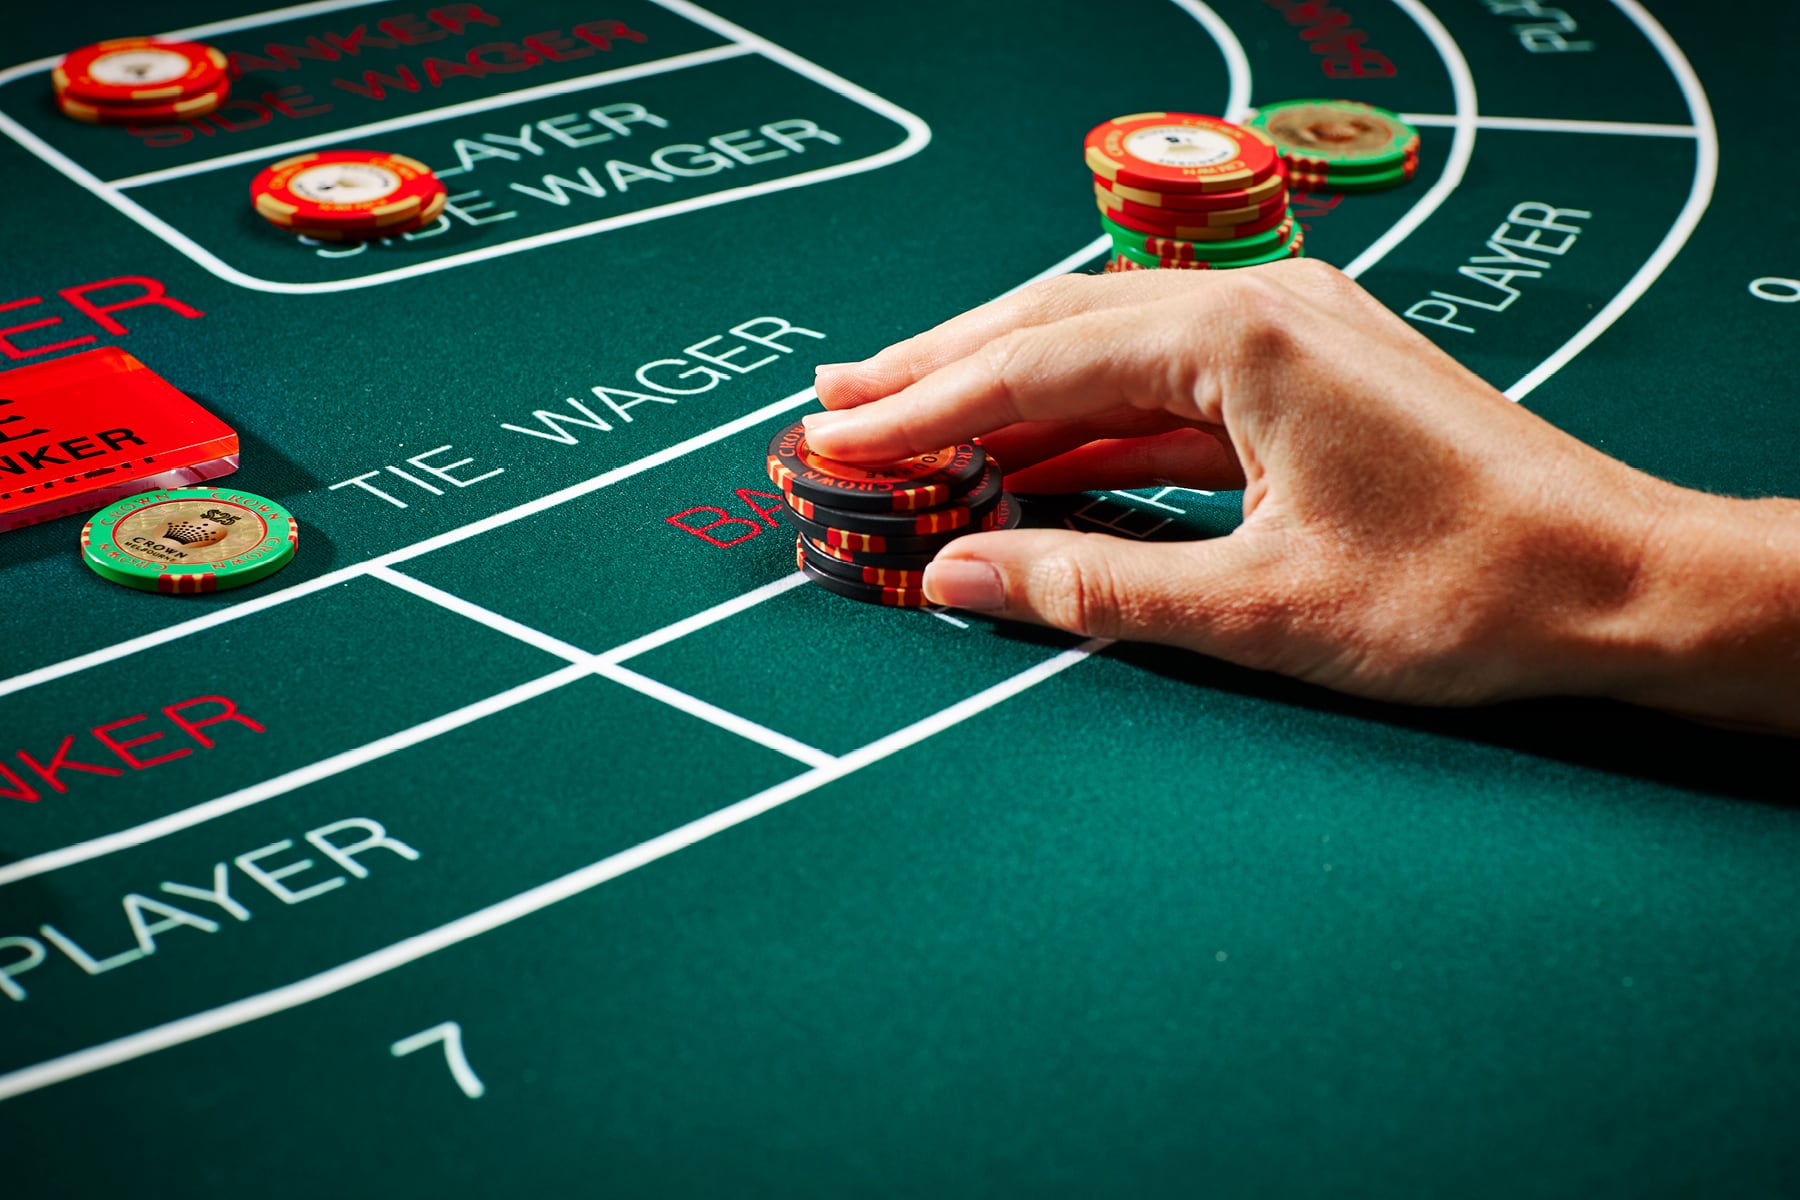 Baccarat is a card game played between two hands: the player and the banker. The goal is to predict which hand will have a total closest to nine.